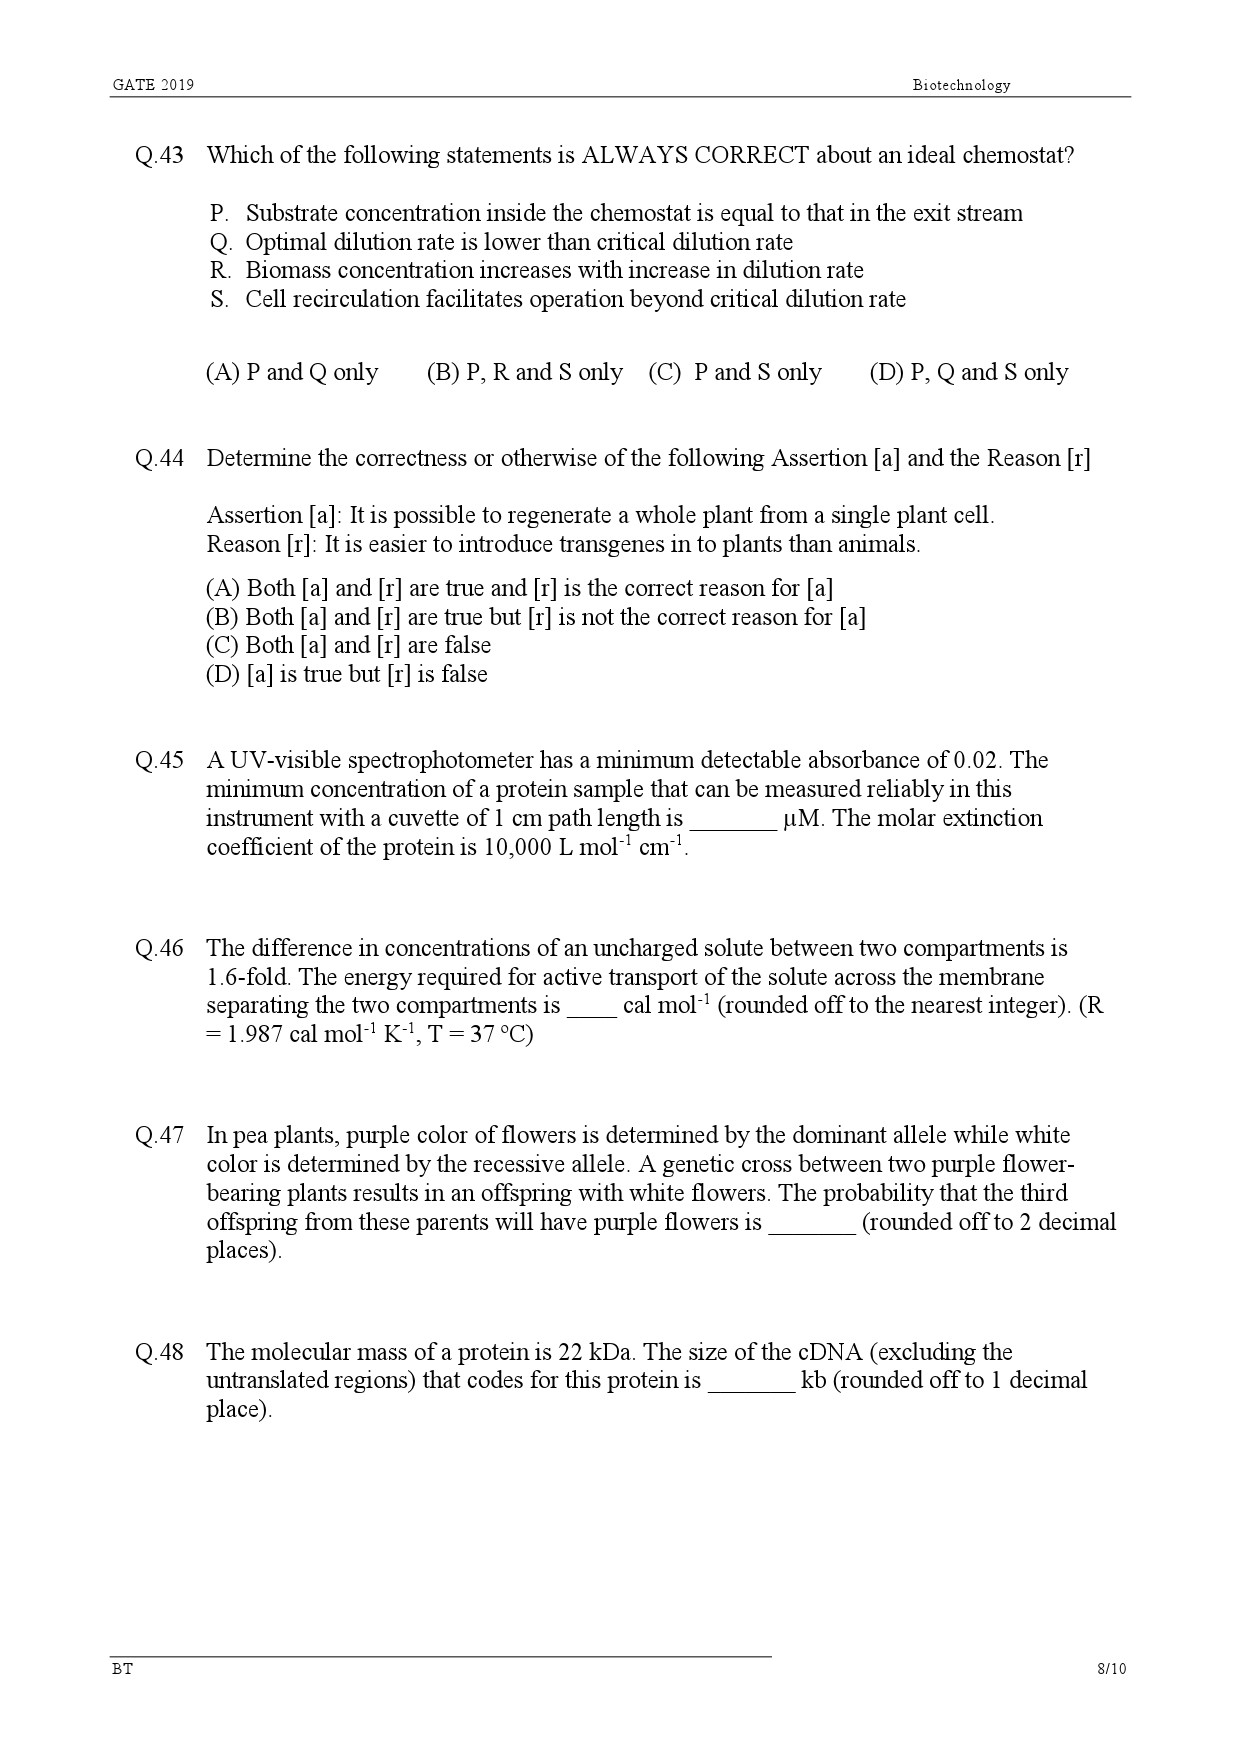 GATE Exam Question Paper 2019 Biotechnology 11